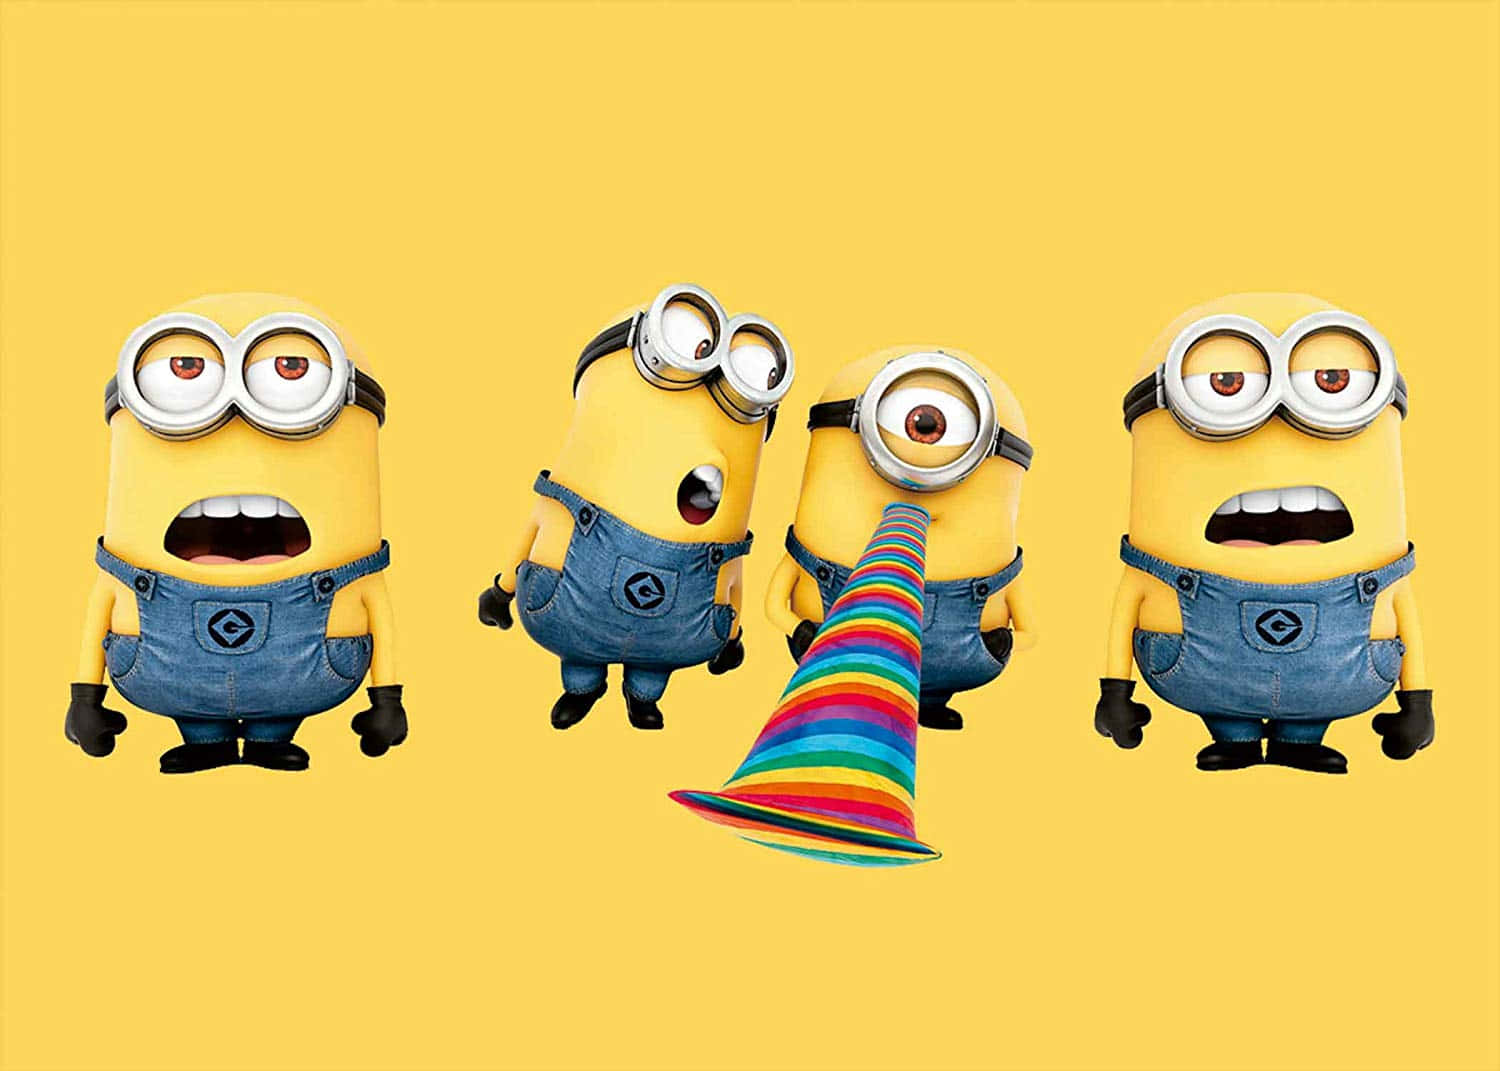 Minion Wallpapers Hd - Wallpapers For Desktop